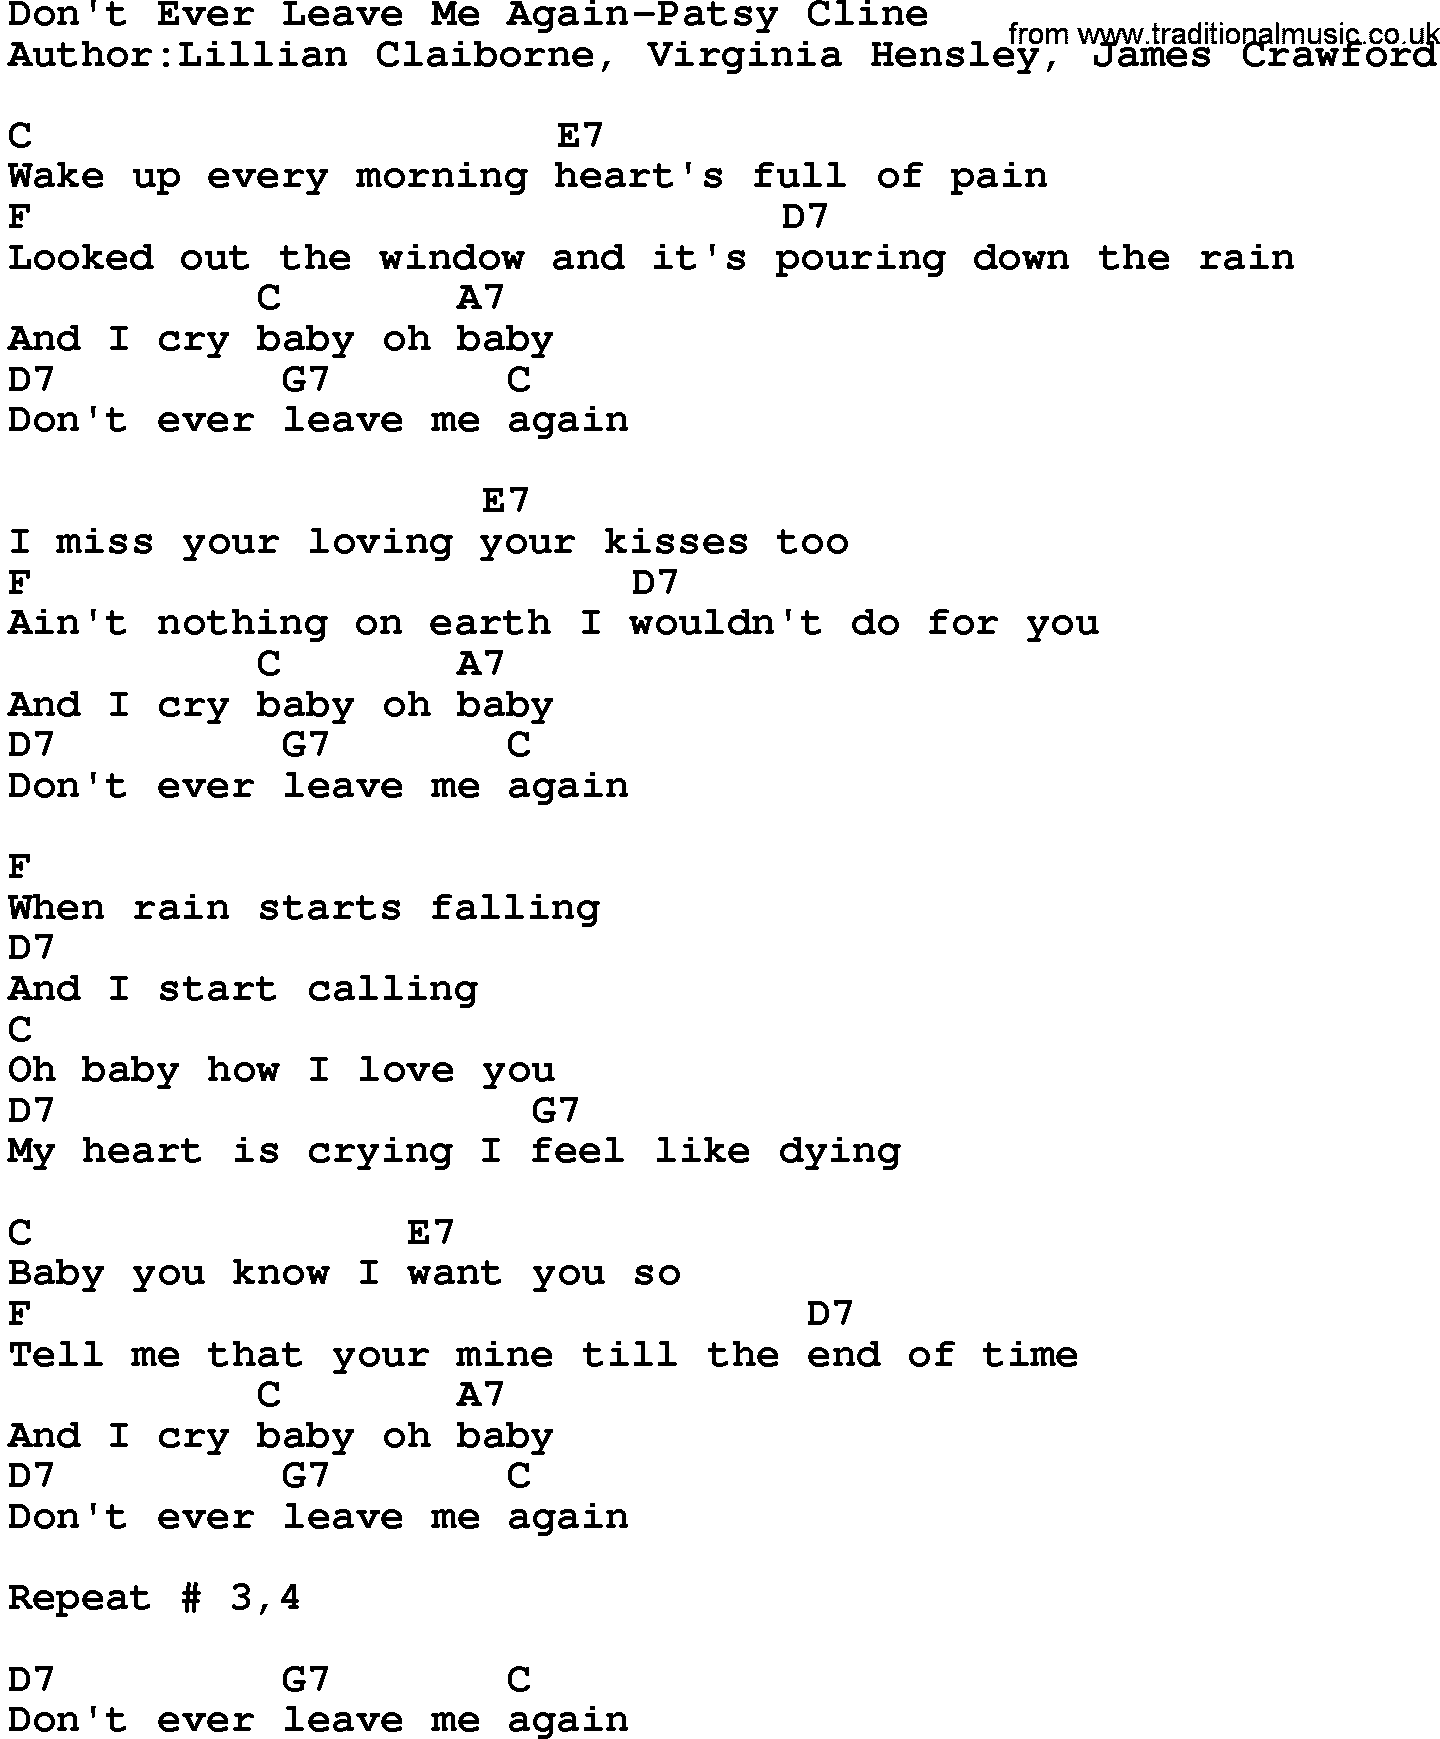 Country music song: Don't Ever Leave Me Again-Patsy Cline lyrics and chords